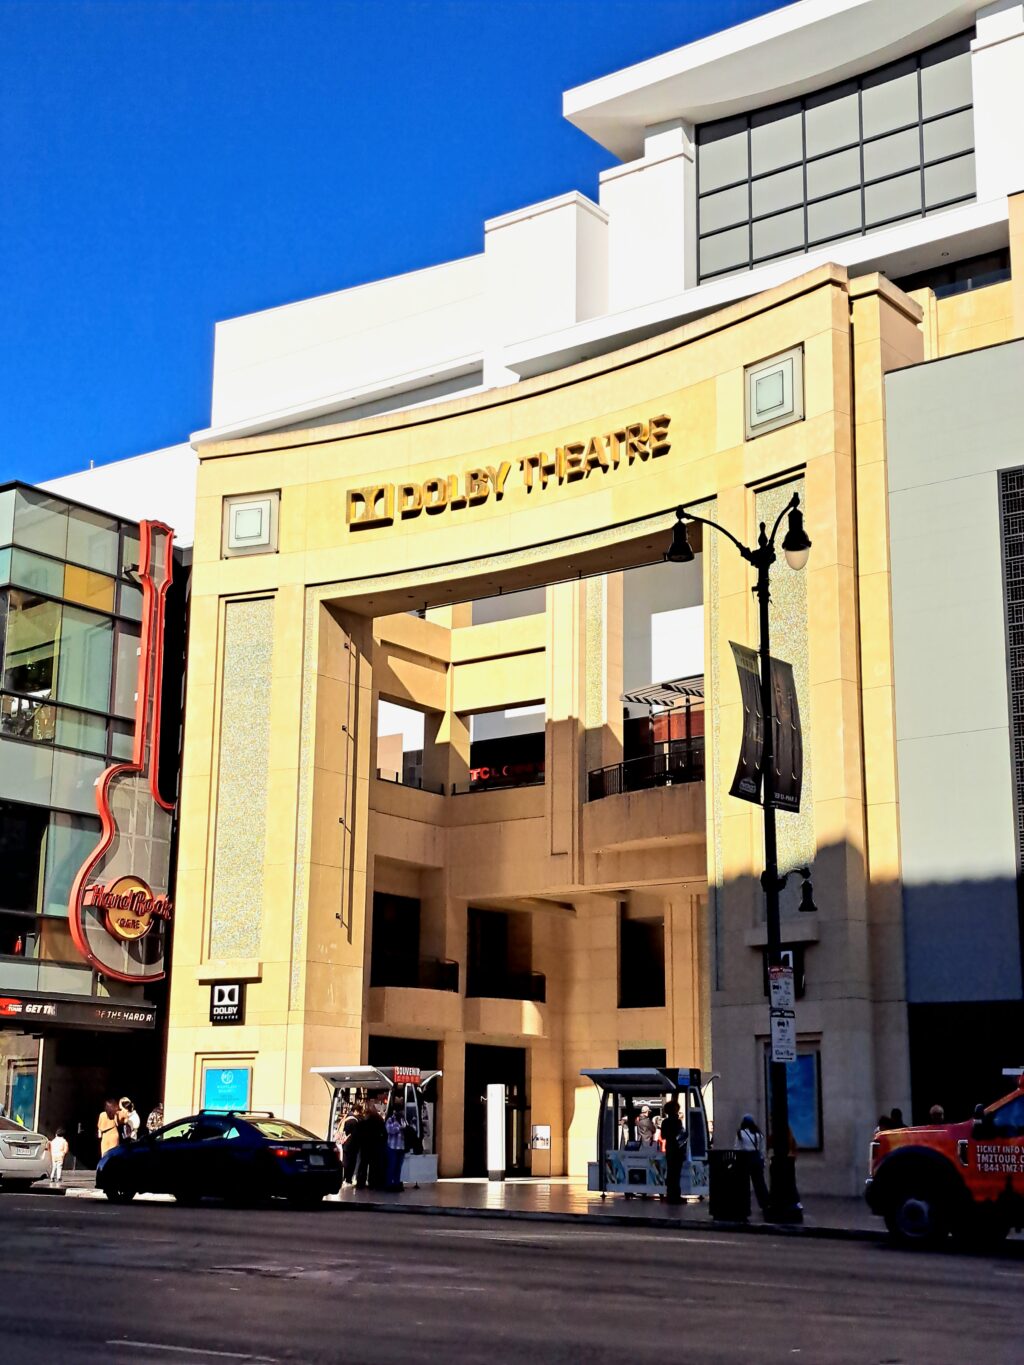 FROM HOLLYWOOD WITH LOVE [Los Angeles City of Angels]. The Dolby Theatre in LA is a world-renowned entertainment venue famous for hosting the annual Academy Awards ceremony (the Oscars). It's located in the Highland Center complex in Hollywood.